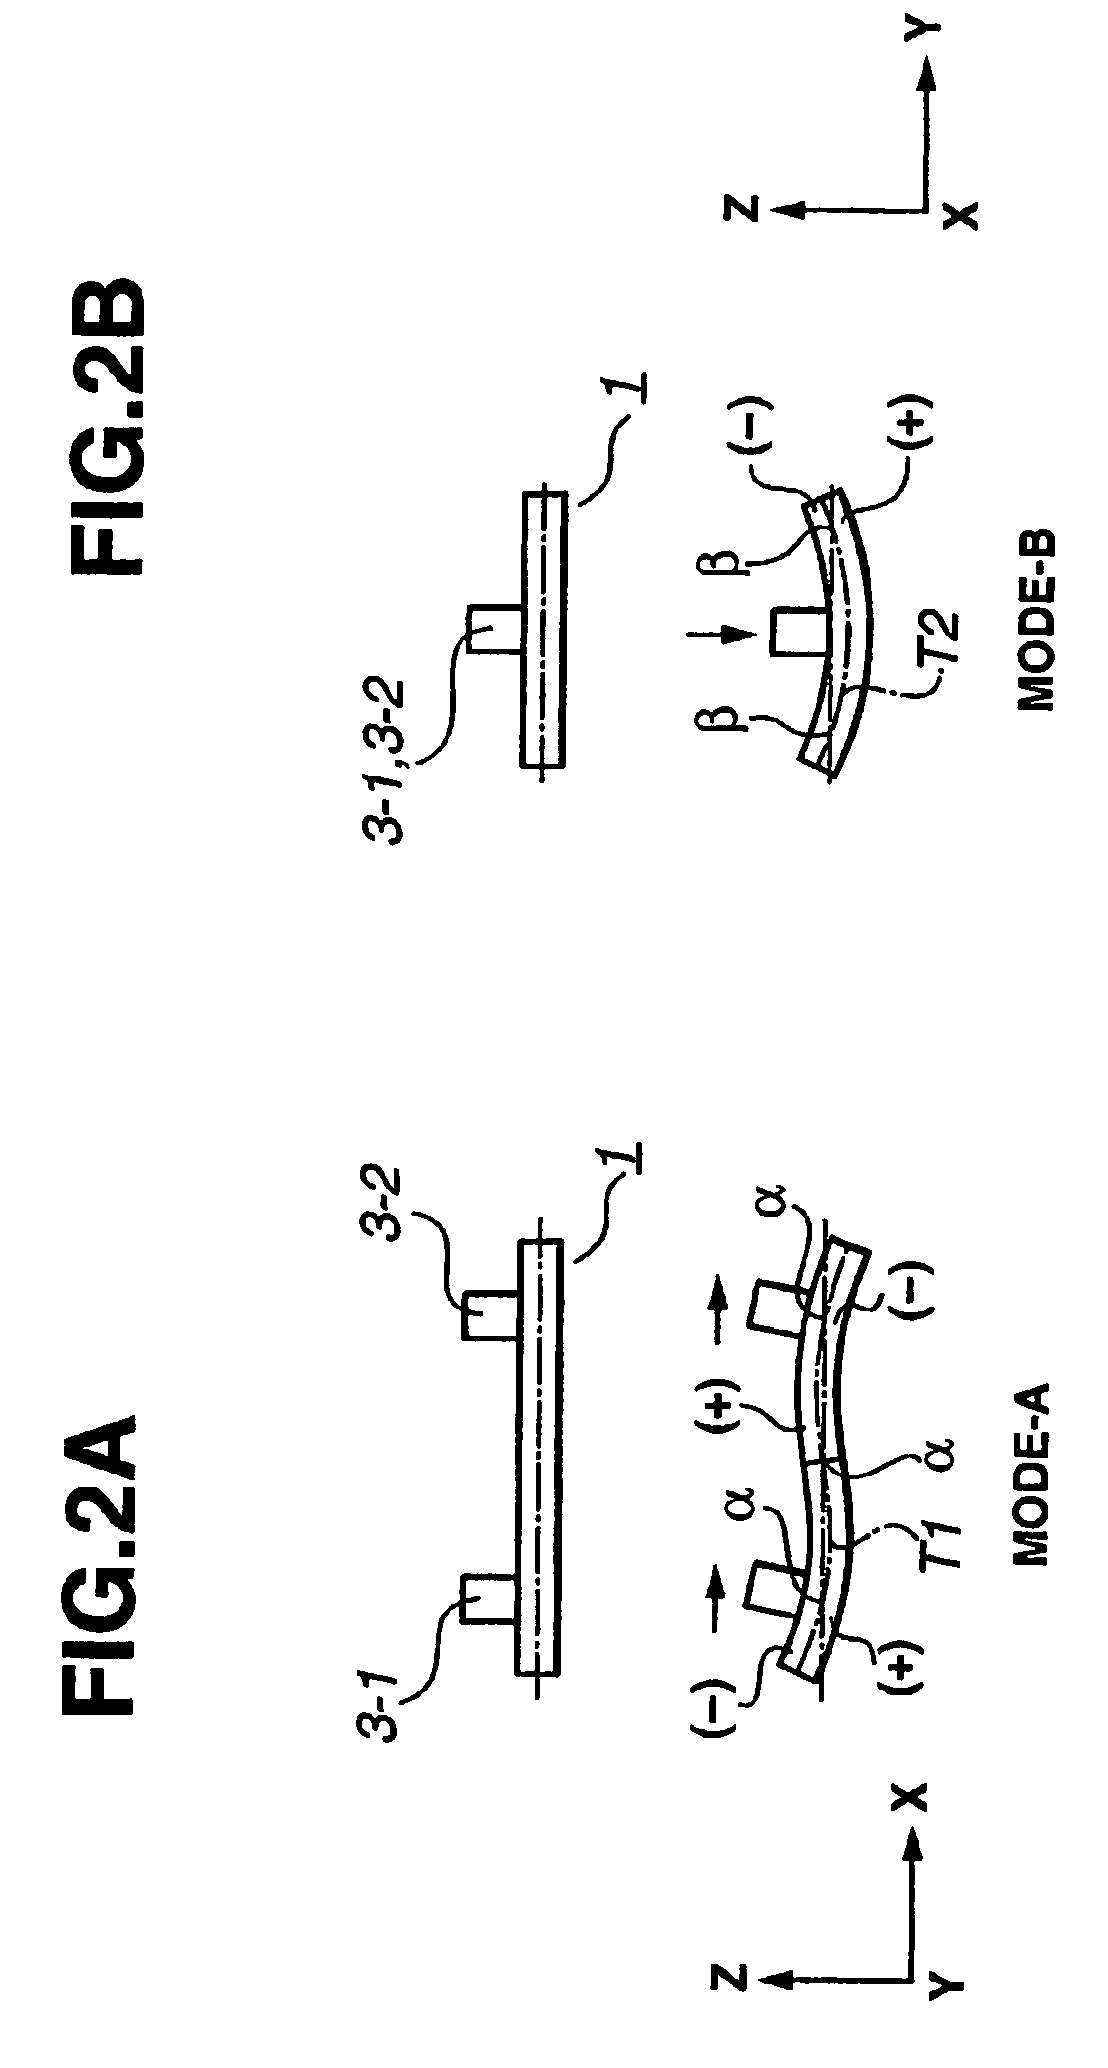 Vibration-type driving device, control apparatus for controlling the driving of the vibration-type driving device, and electronic equipment having the vibration-type driving device and the control apparatus